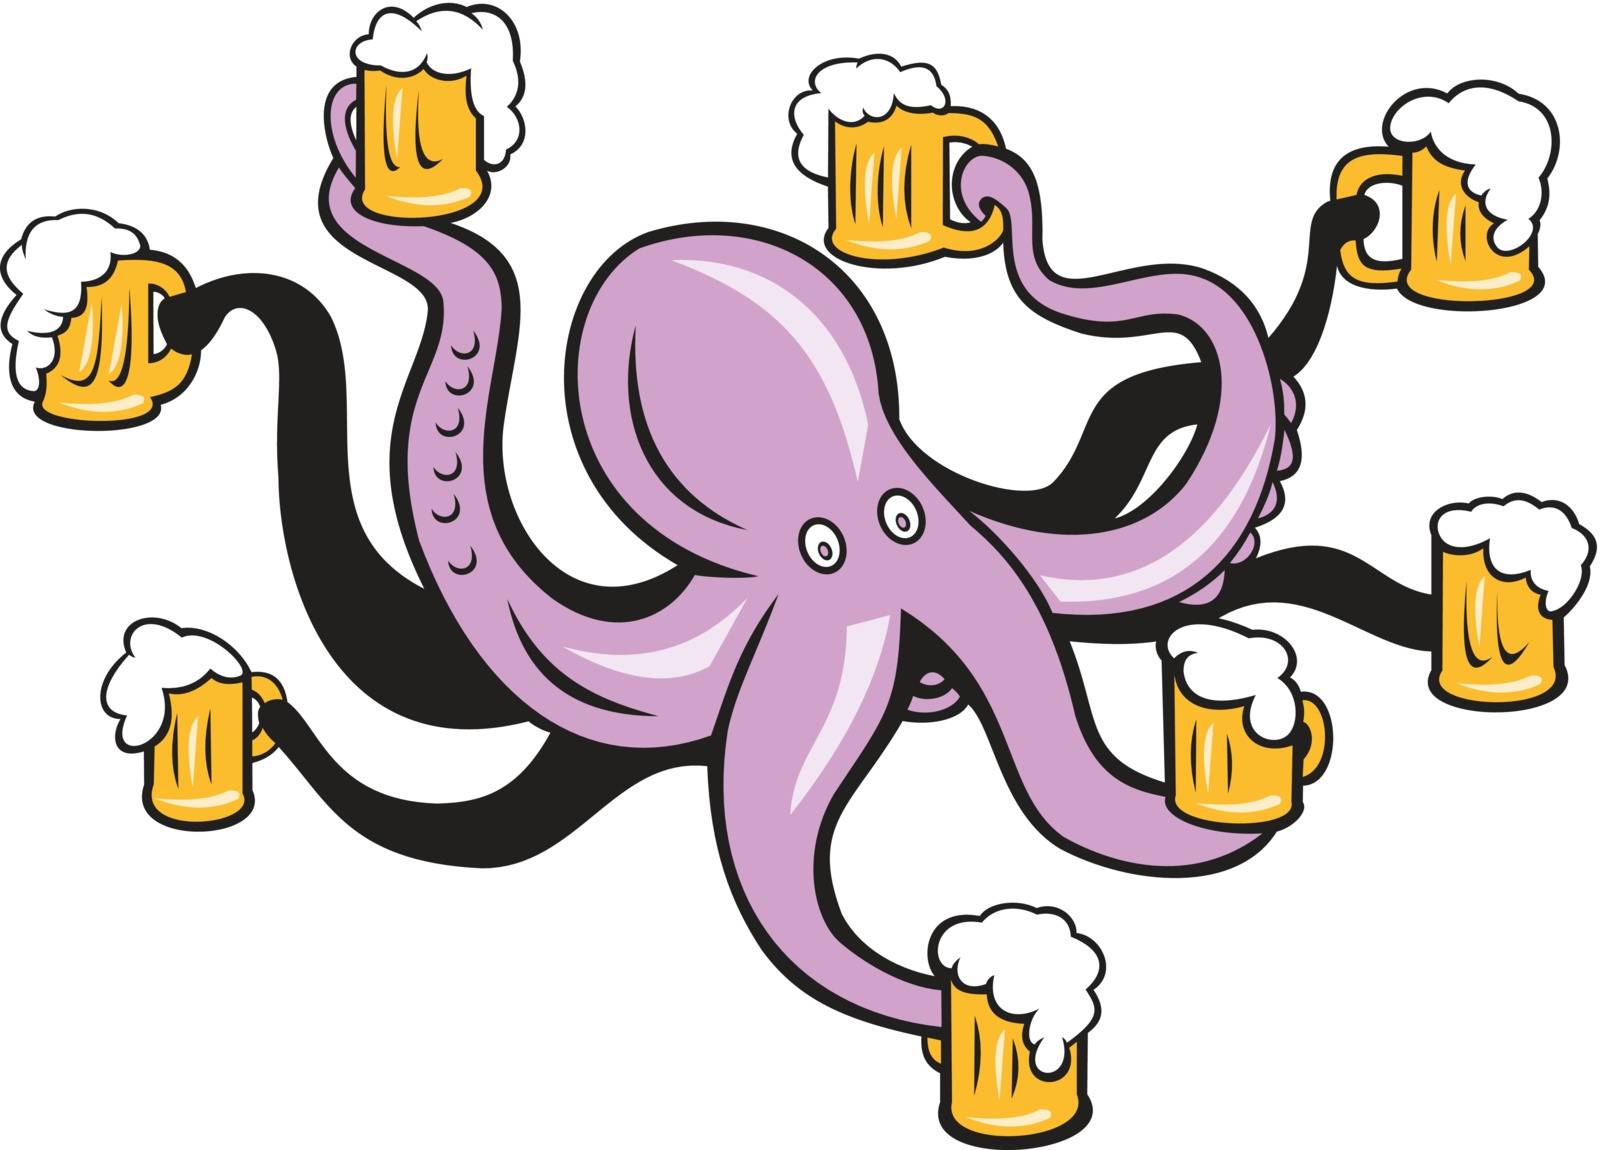 Illustration of an octopus holding beer mug on tentacles on isolated background done in cartoon style.